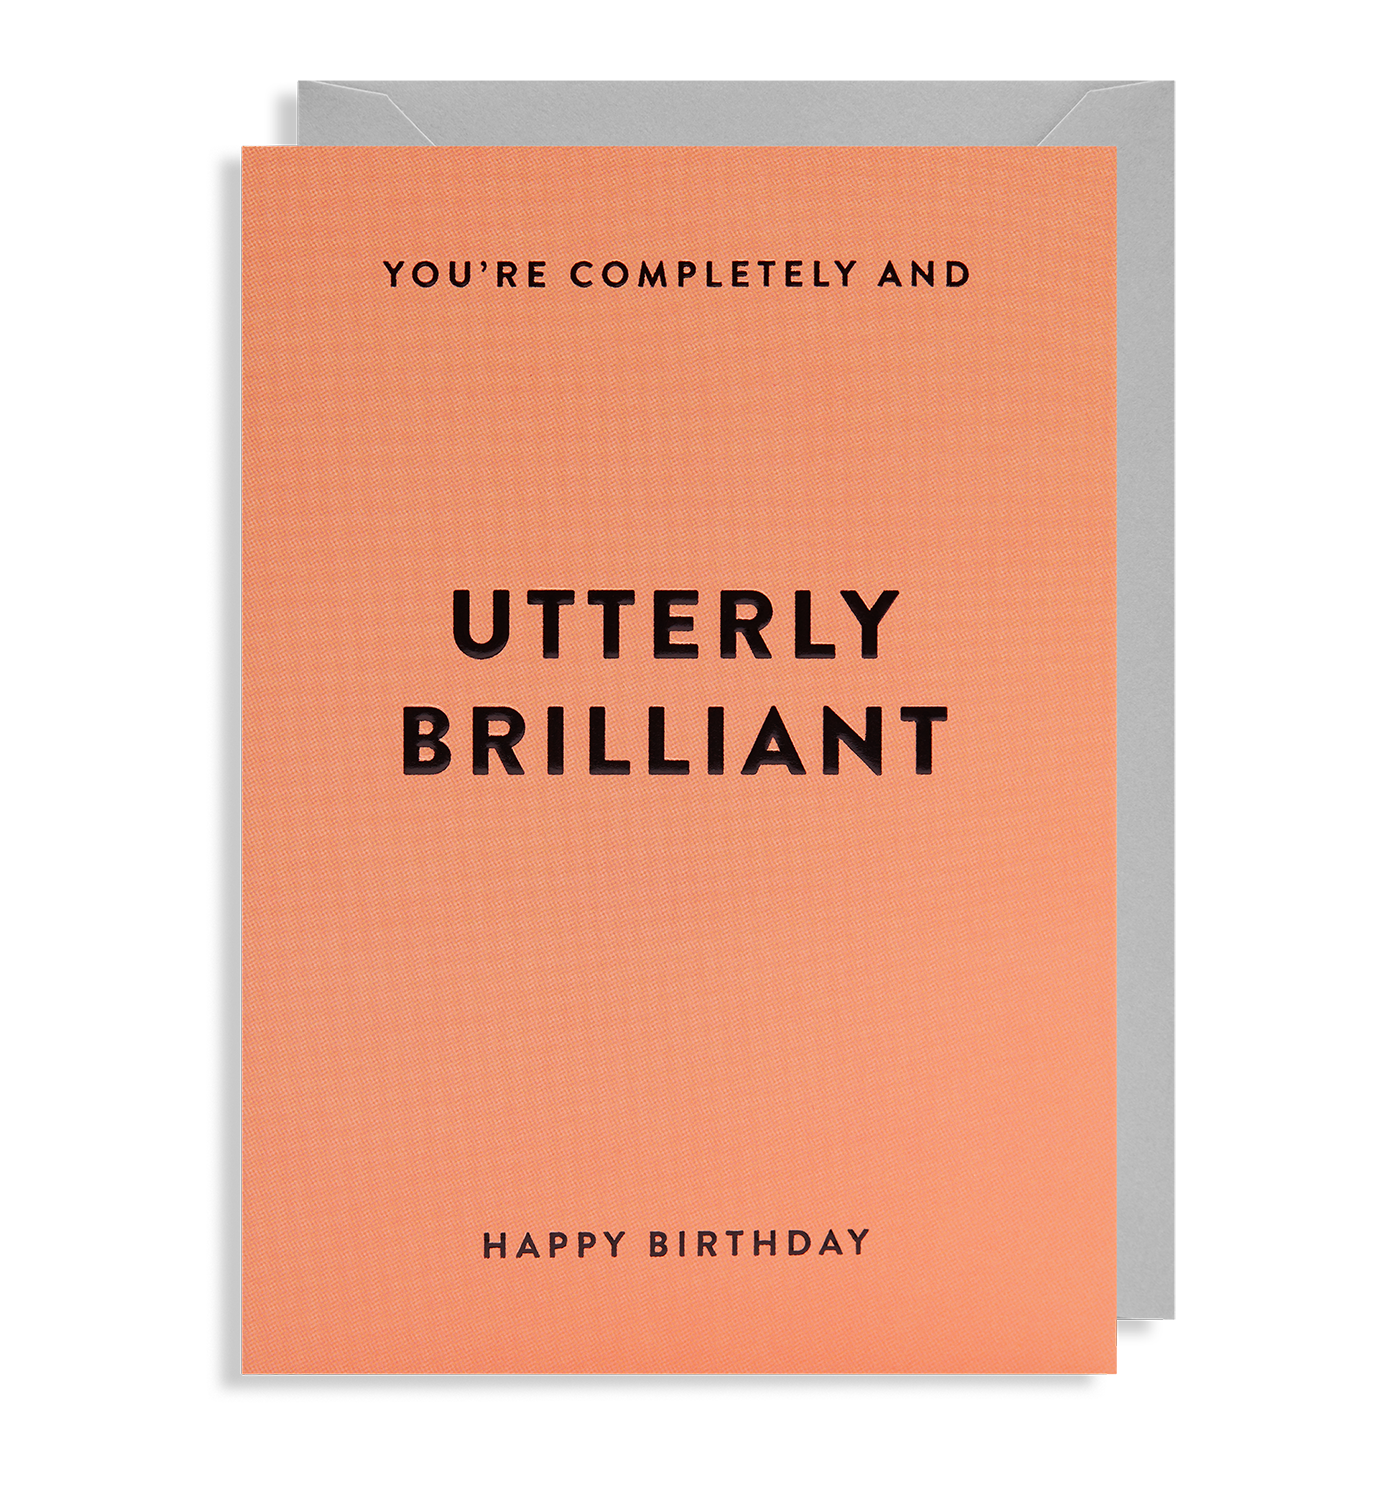 You're Completely and Utterly Brilliant